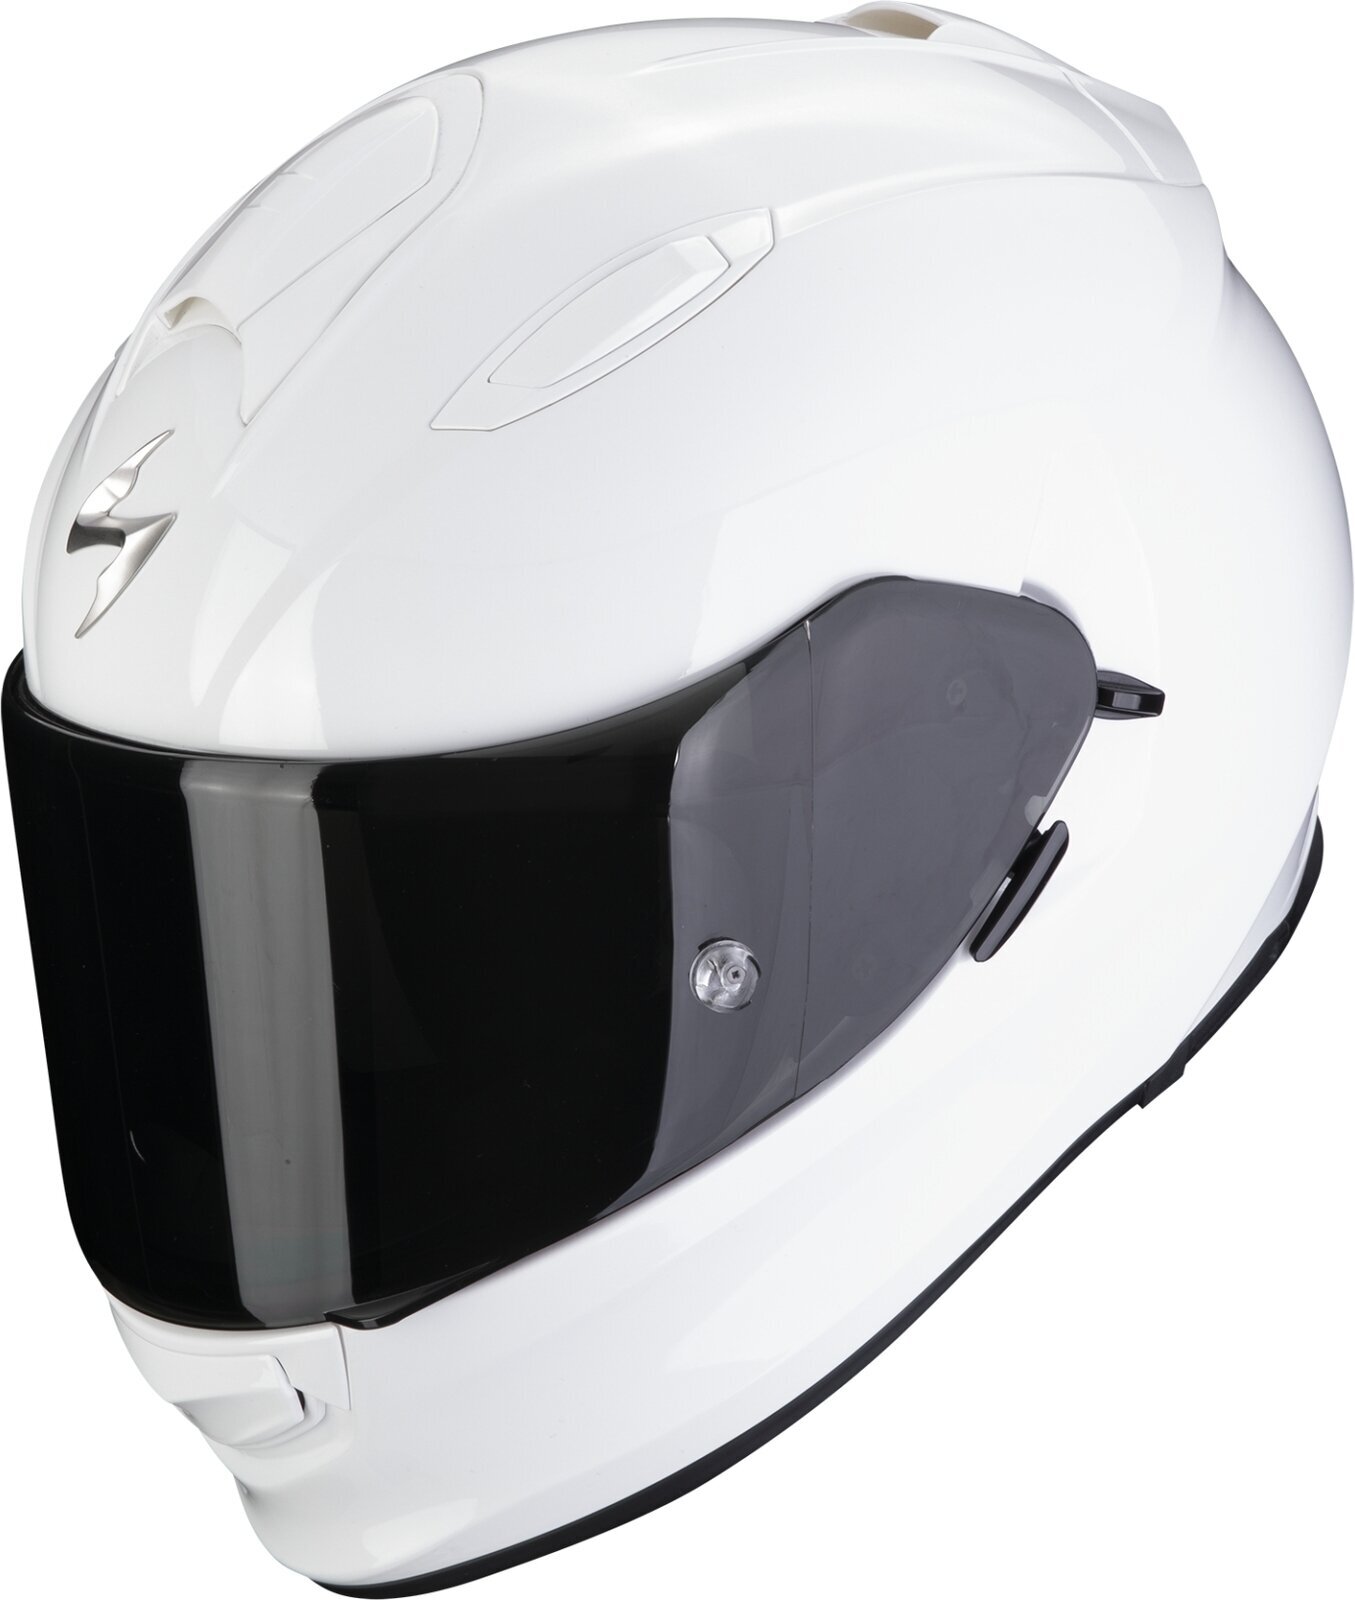 Kask Scorpion EXO 491 SOLID White 2XL Kask